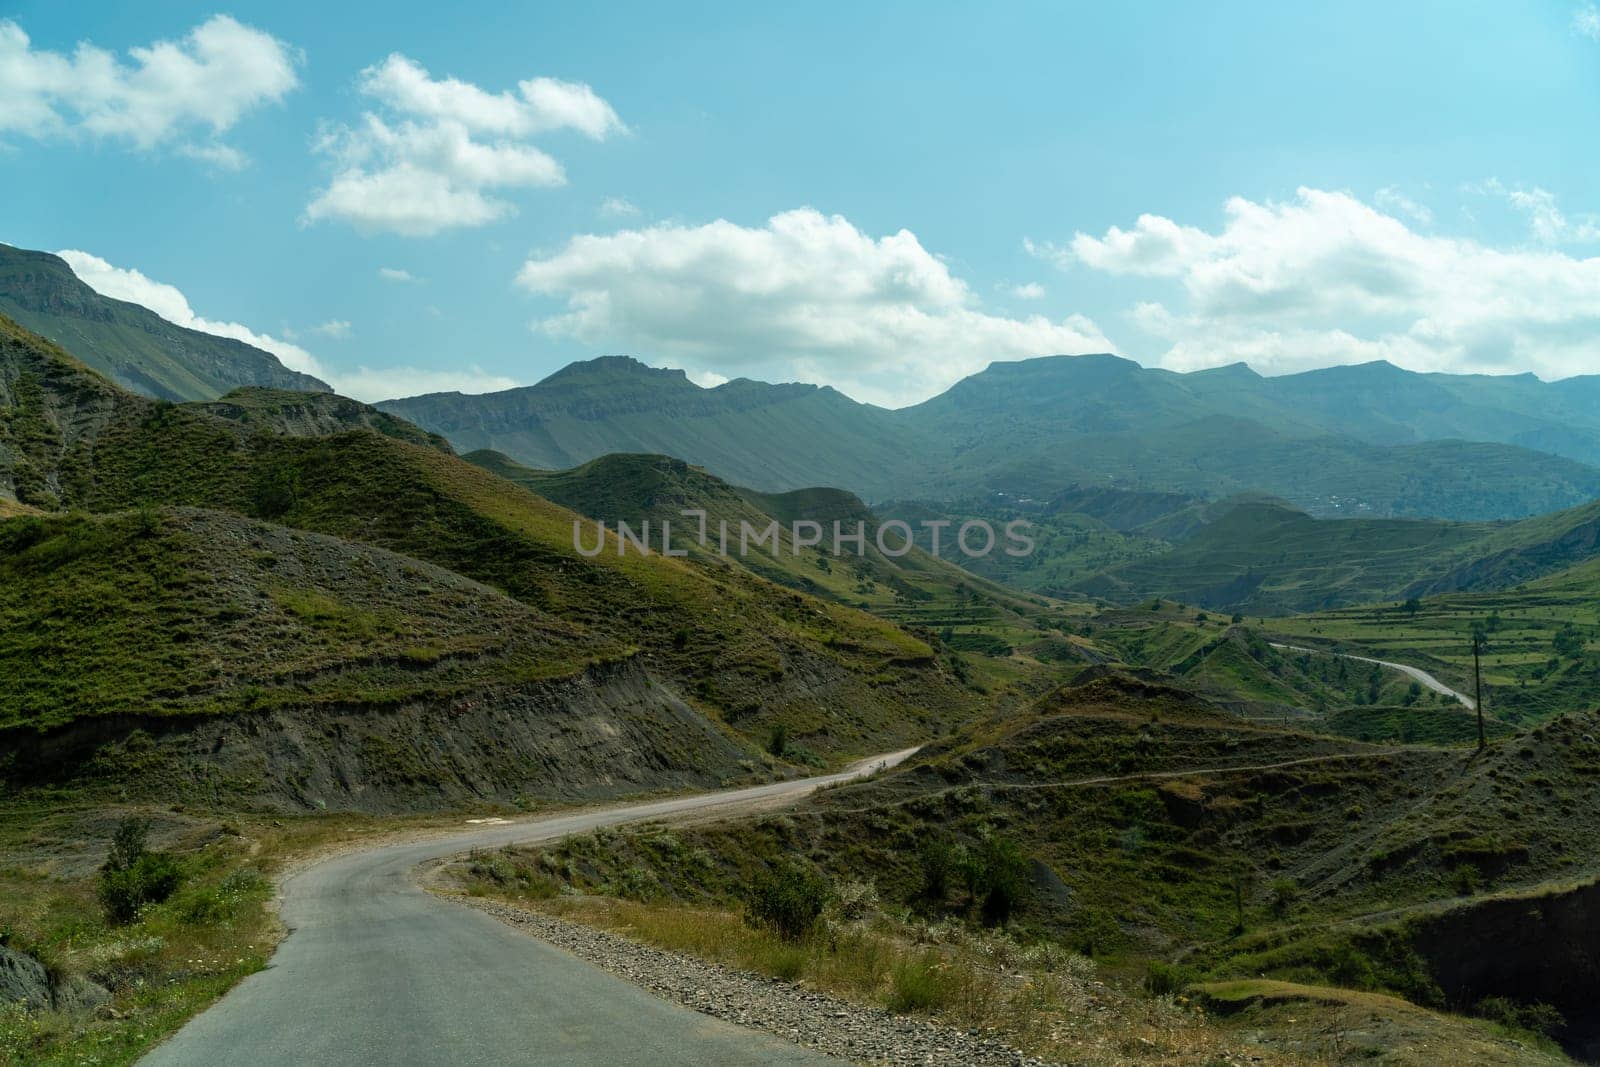 View from the car of an asphalt road in the mountainous area of Dagestan by Matiunina